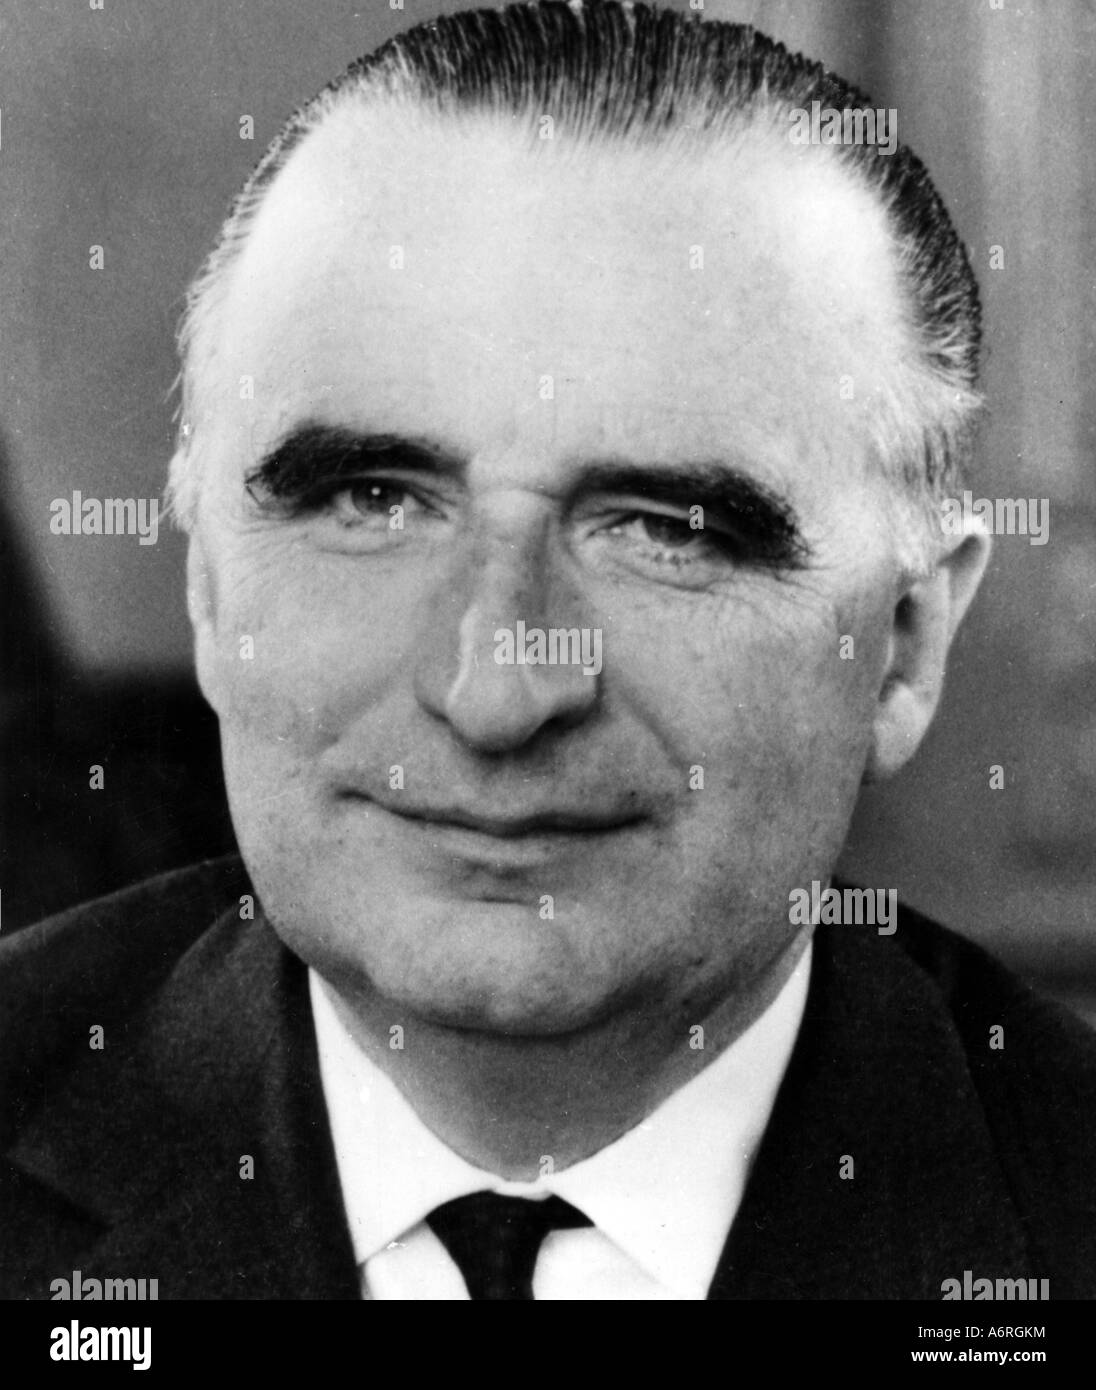 Pompidou, Georges 5.7.1911 - 2.4.1974, French politician (UDR), Prime Minister 14.41962 - 10.7.1968, portrait, 1960s, 60s, gaull Stock Photo